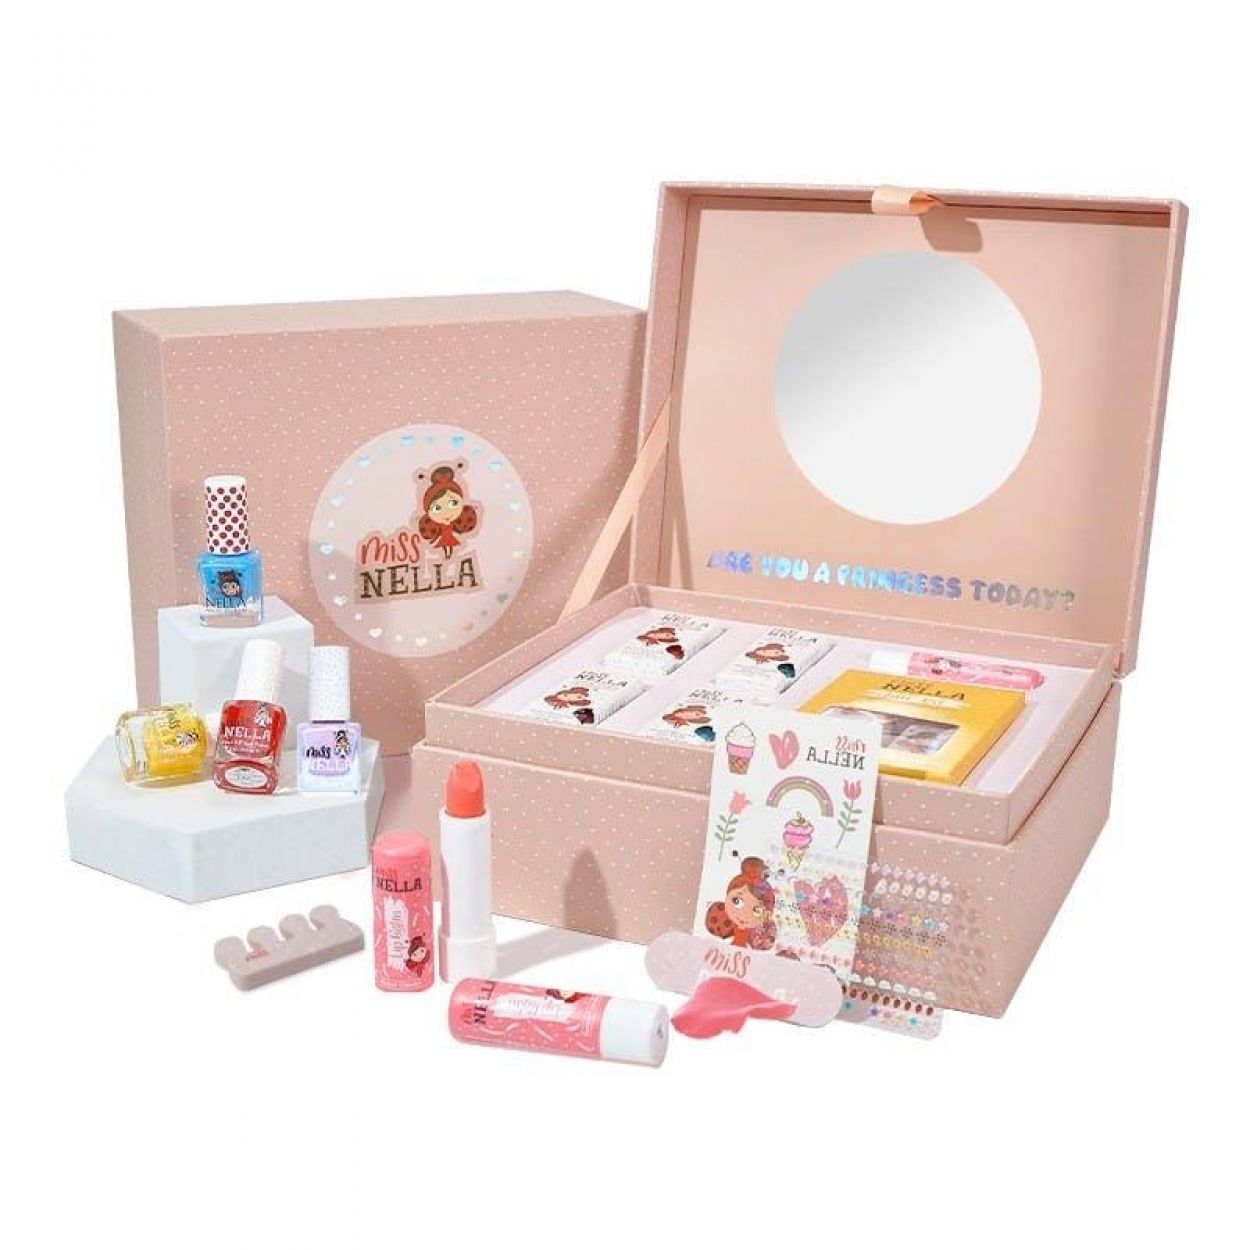 Miss Nella Limited Edition Beauty Case (Suitcase Lim.Ed.) - WeekendMode